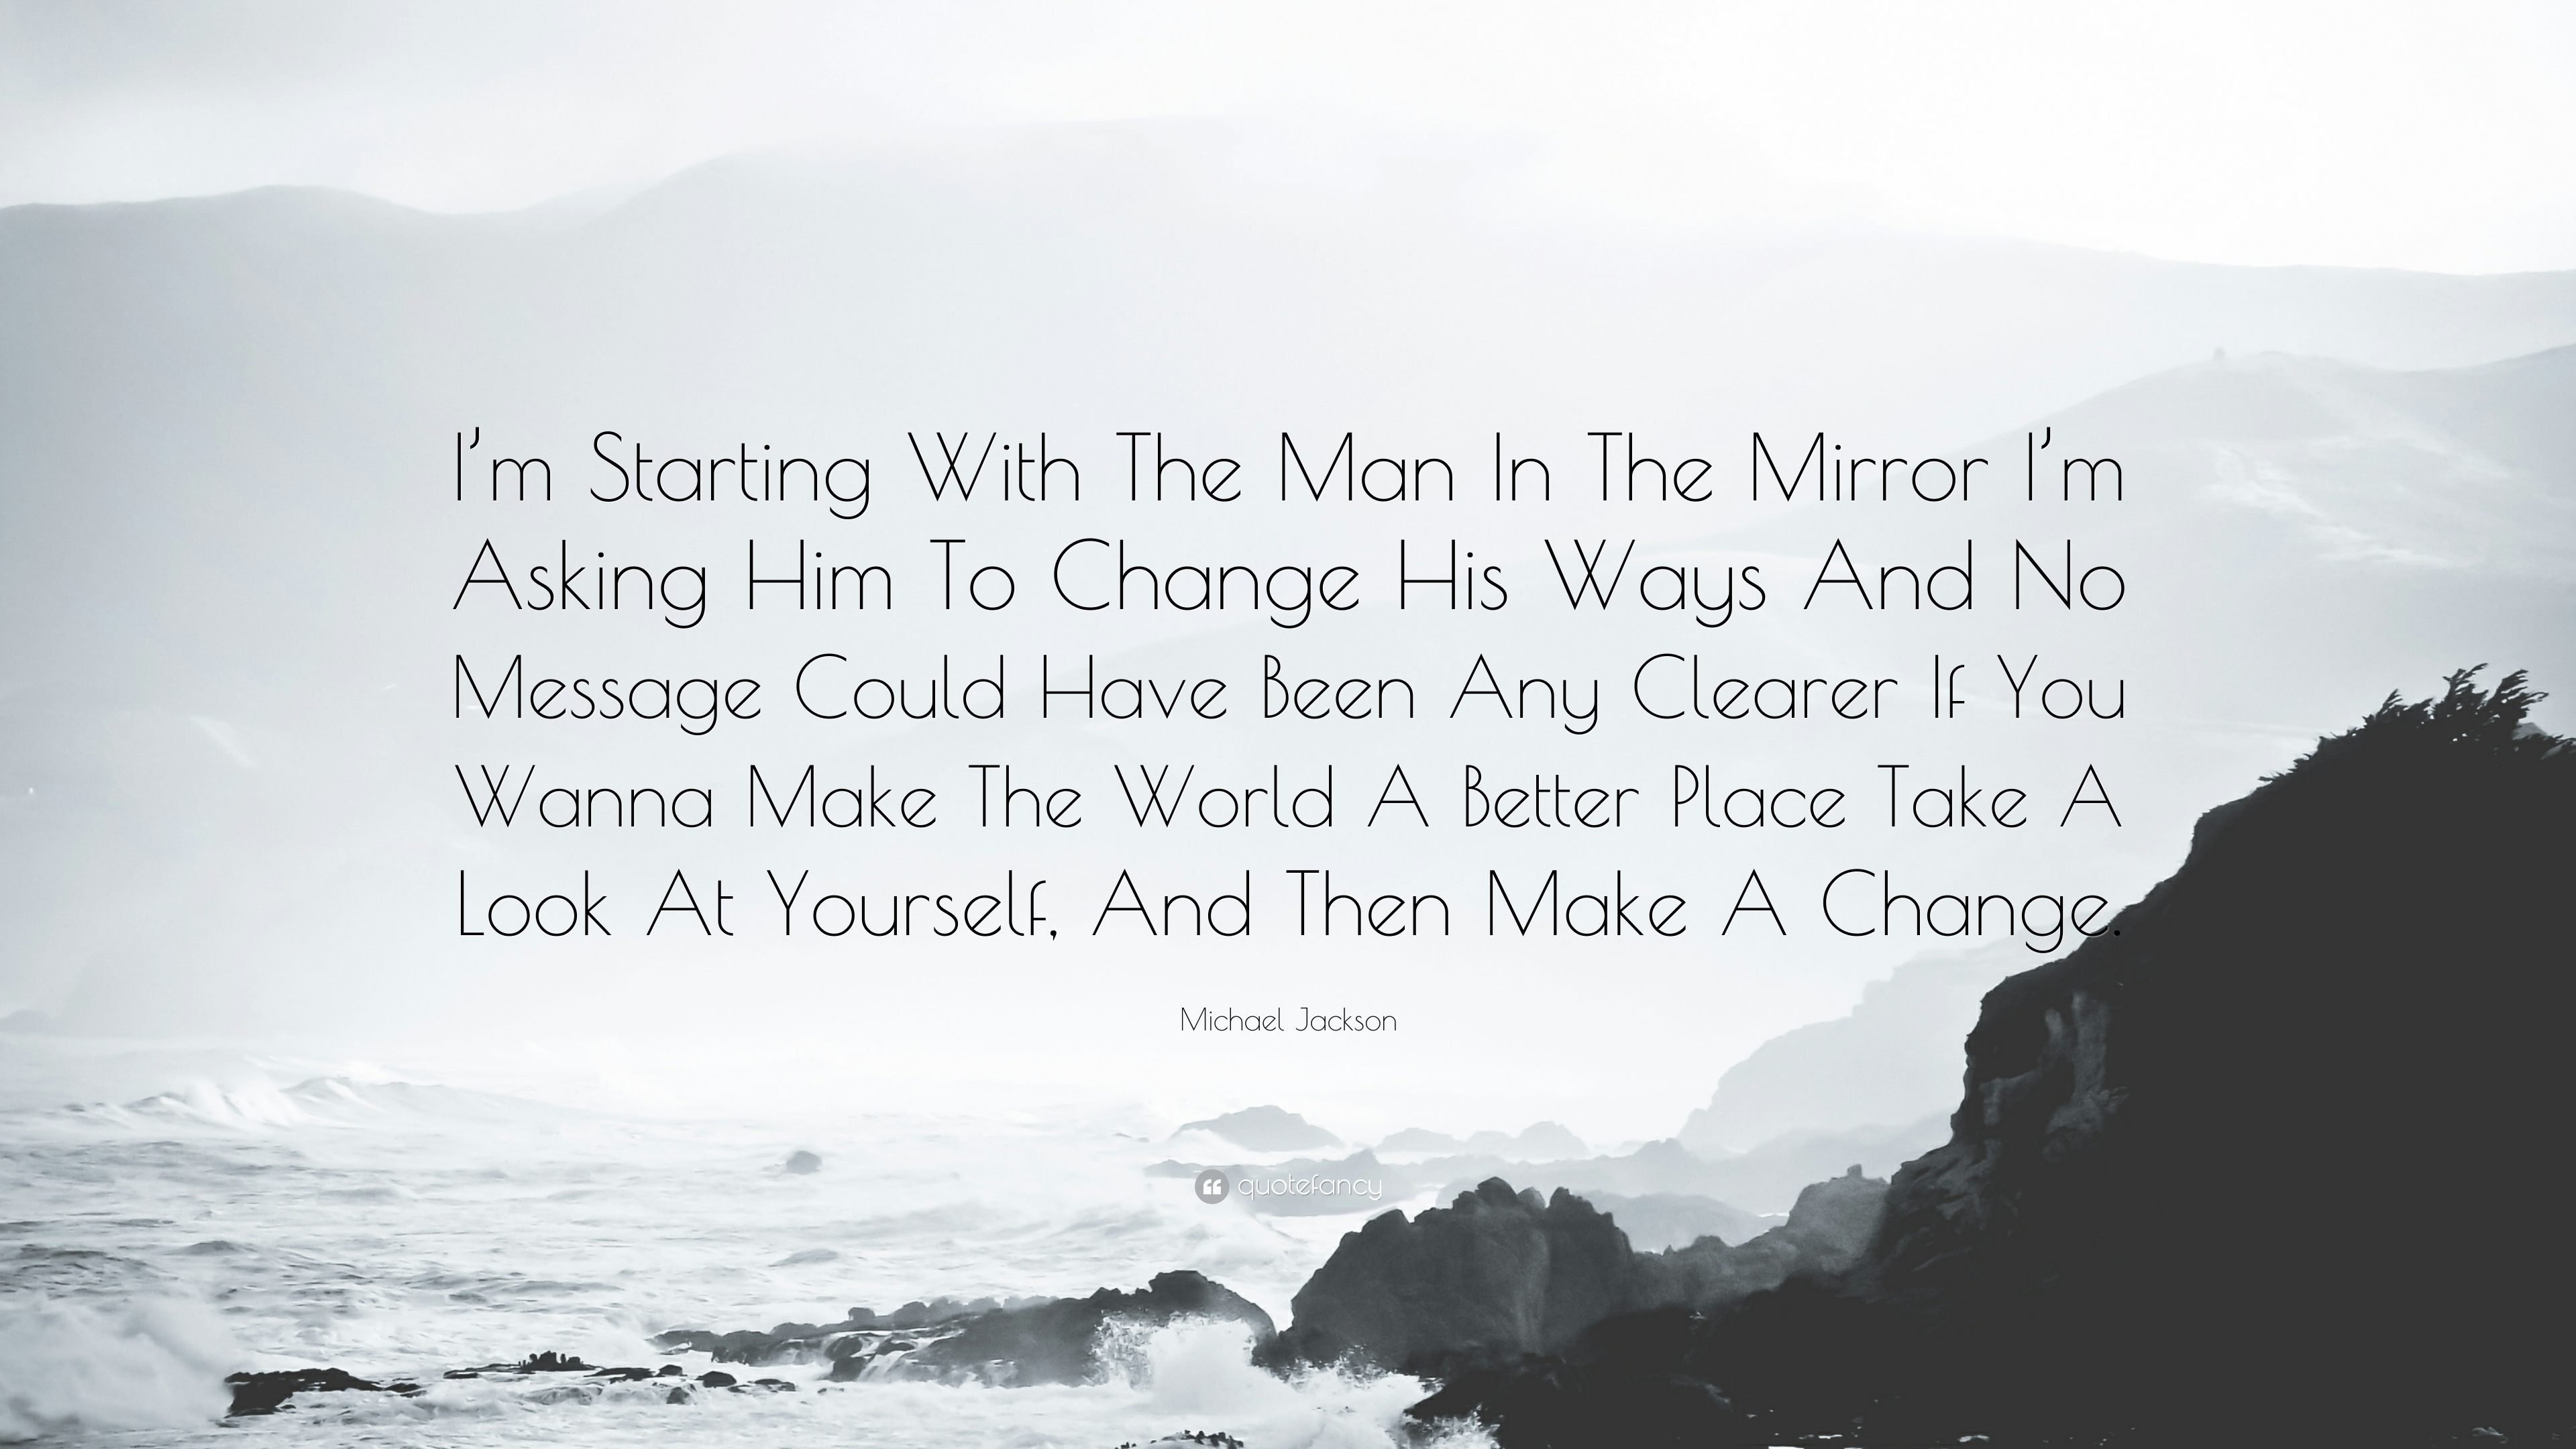 Michael Jackson Quote: “I'm Starting With The Man In The Mirror I'm